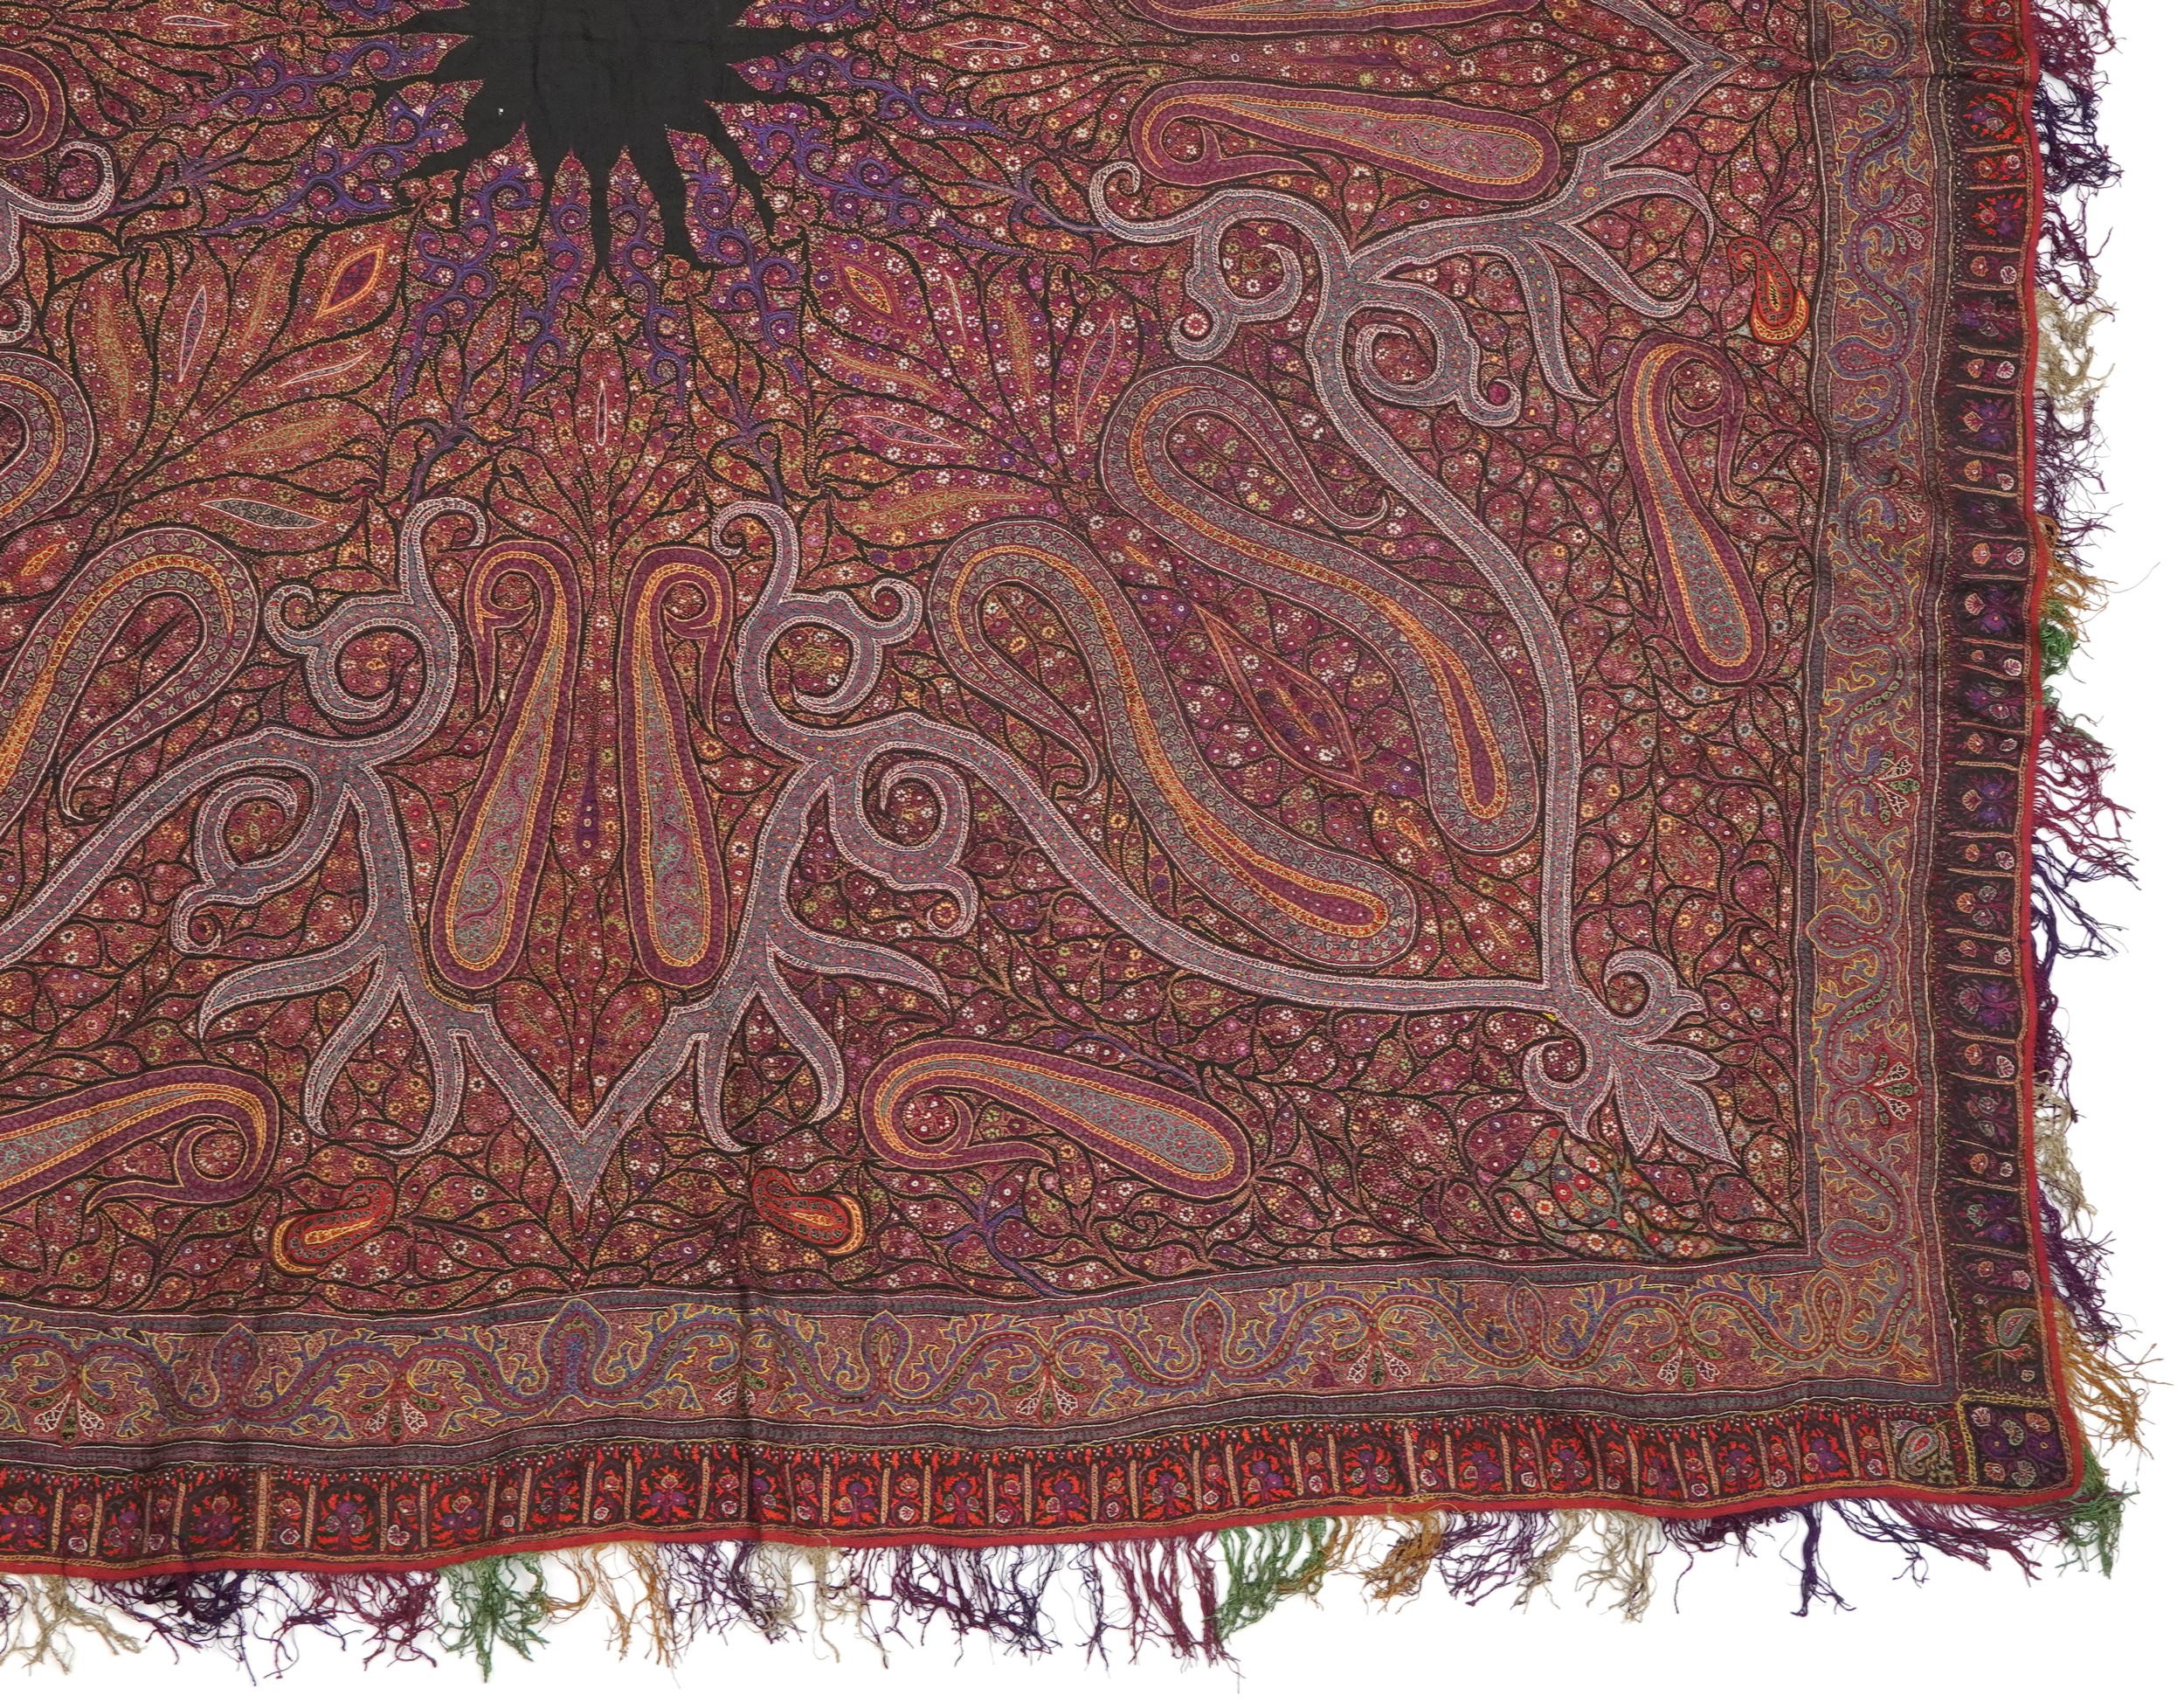 19th century Indian Kashmir/cashmere textile or shawl, 170cm x 170cm : For further information on - Image 5 of 12